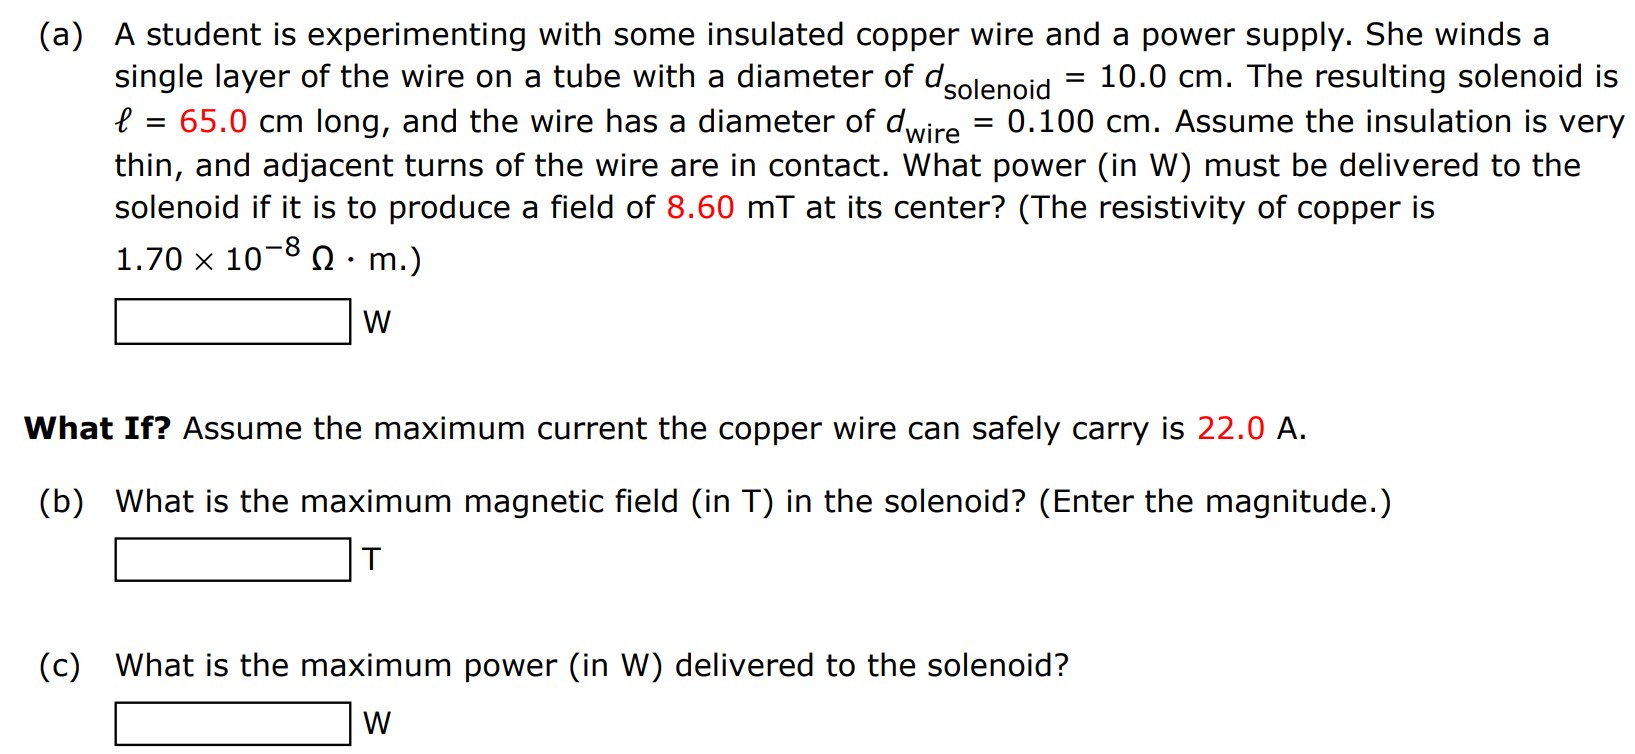 (a) A student is experimenting with some insulated copper wire and a power supply. She winds a single layer of the wire on a tube with a diameter of dsolenoid = 10.0 cm. The resulting solenoid is ℓ = 65.0 cm long, and the wire has a diameter of dwire = 0.100 cm. Assume the insulation is very thin, and adjacent turns of the wire are in contact. What power (in W) must be delivered to the solenoid if it is to produce a field of 8.60 mT at its center? (The resistivity of copper is 1.70×10−8 Ω⋅m. ) W What If? Assume the maximum current the copper wire can safely carry is 22.0 A. (b) What is the maximum magnetic field (in T) in the solenoid? (Enter the magnitude.) T (c) What is the maximum power (in W) delivered to the solenoid? W 